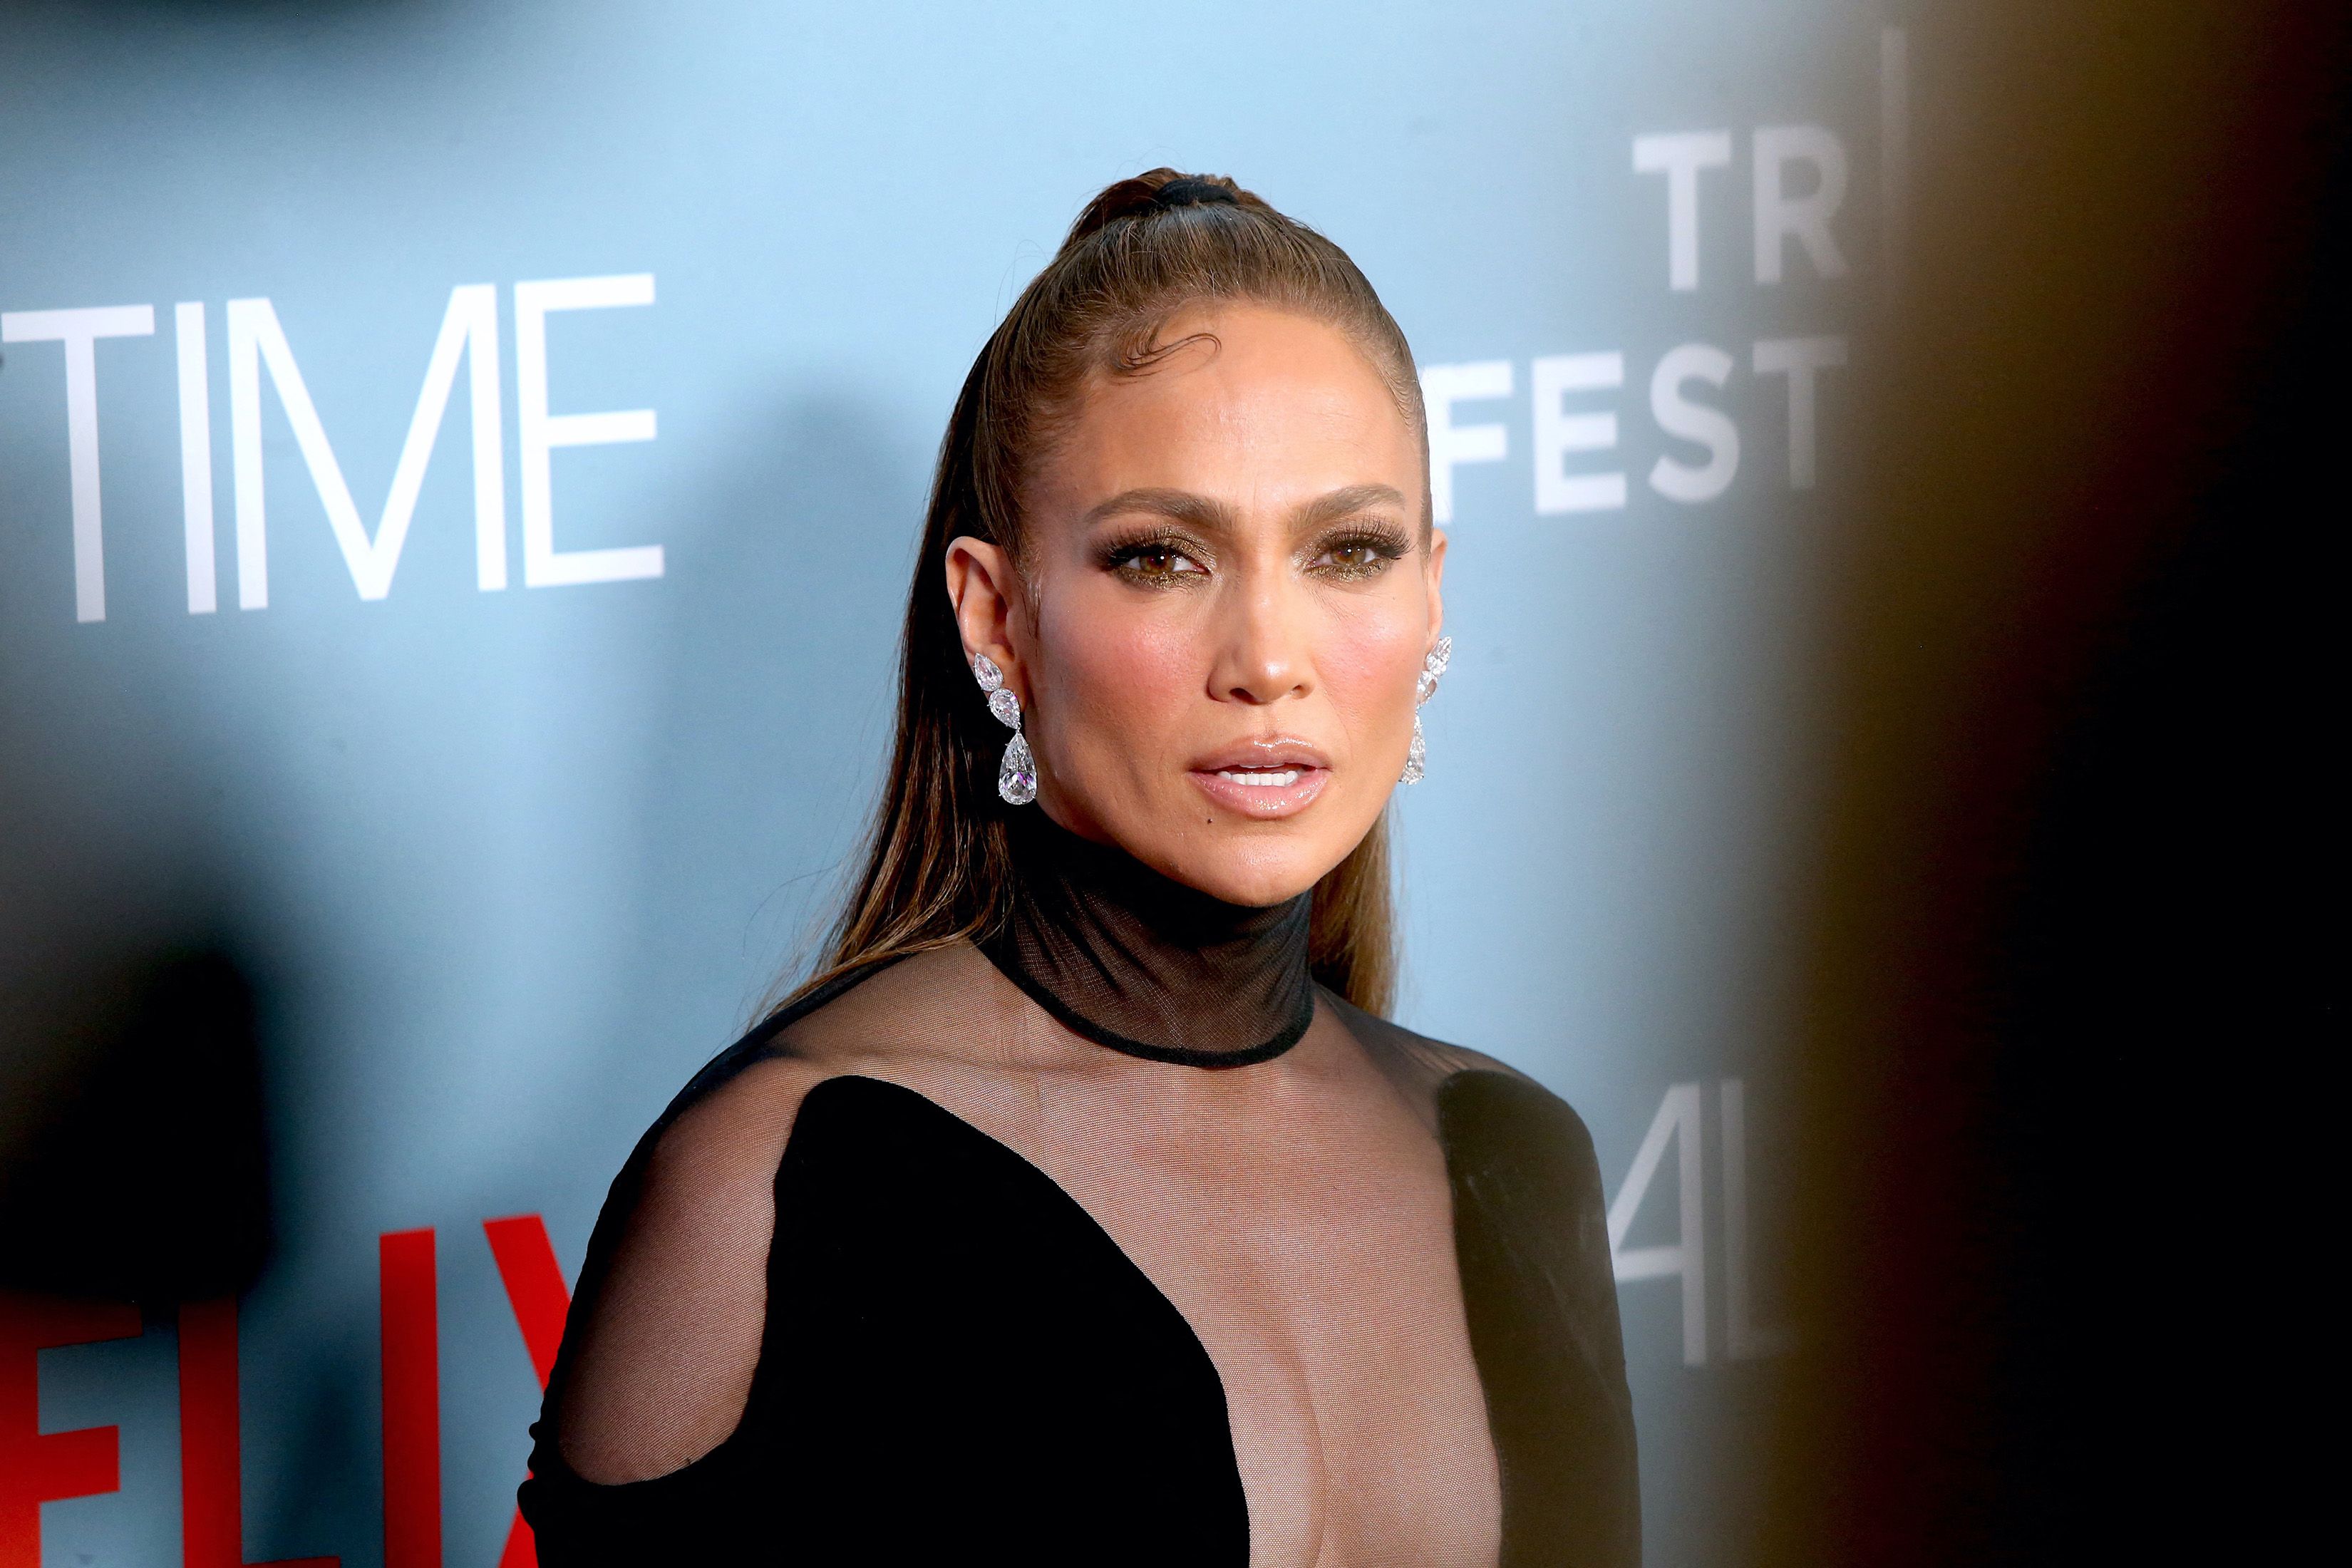 Rosie Perez Revealed Jennifer Lopez Manipulated The Wardrobe And Makeup To Her Advantage During In Living Color